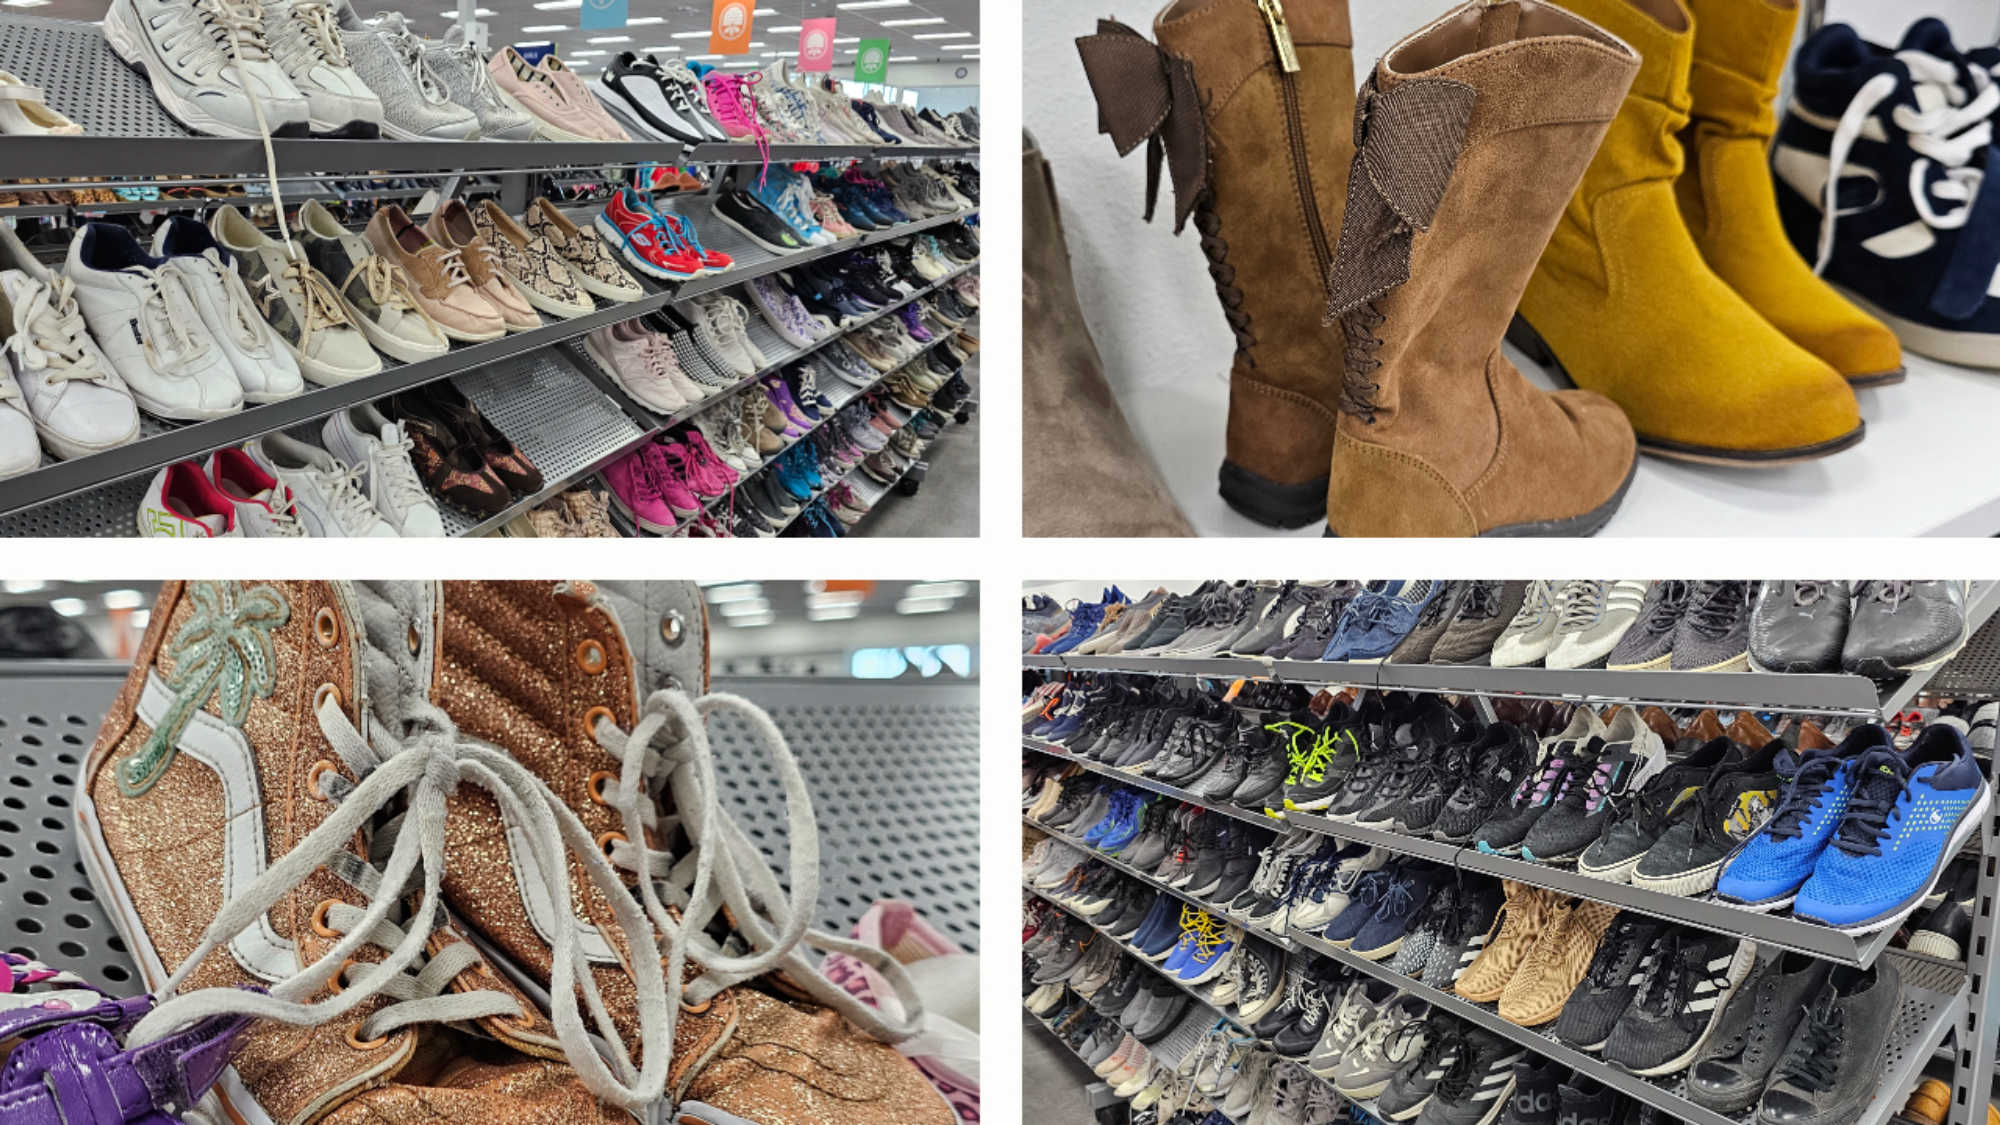 A collage of images showing shelves of shoes and individual pairs of shoes available at Deseret Industries.